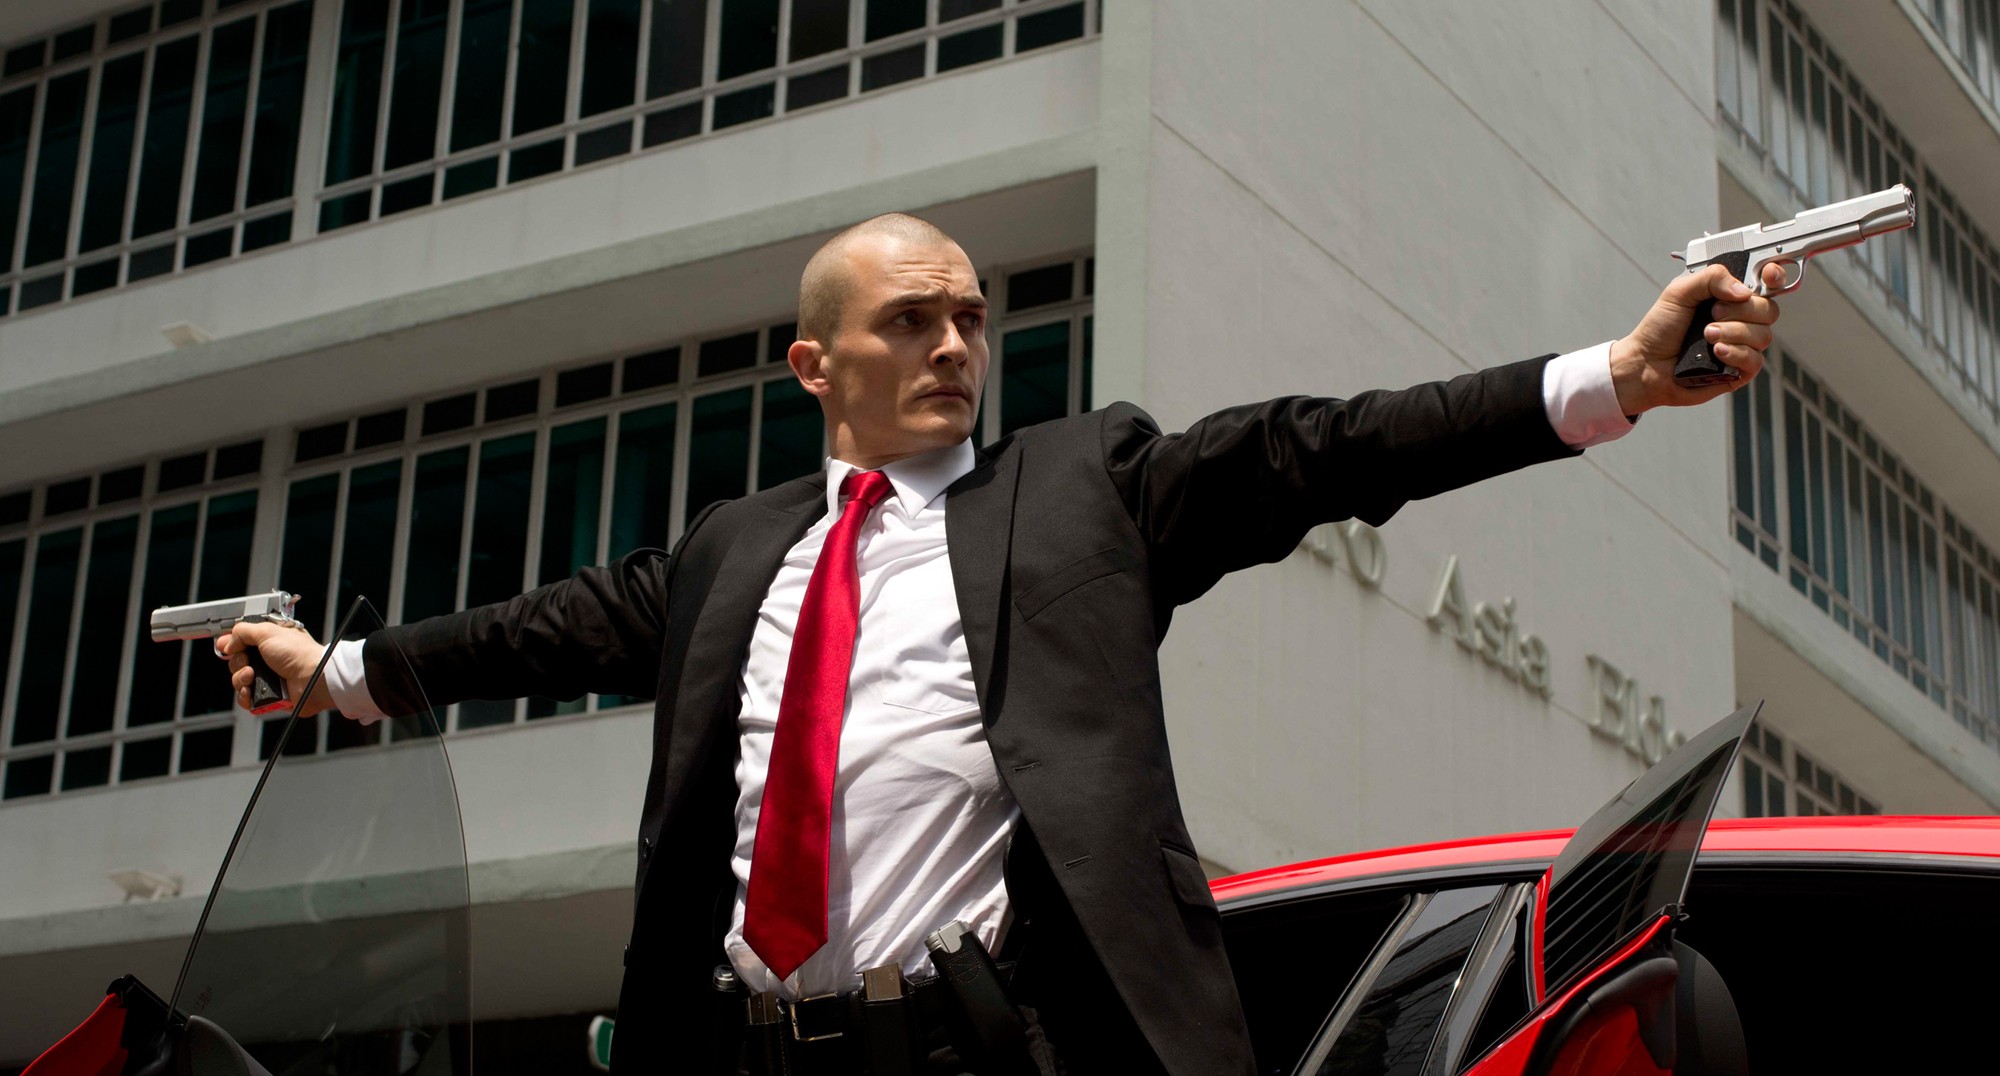 HITMAN: AGENT 47 Is Dead On Arrival